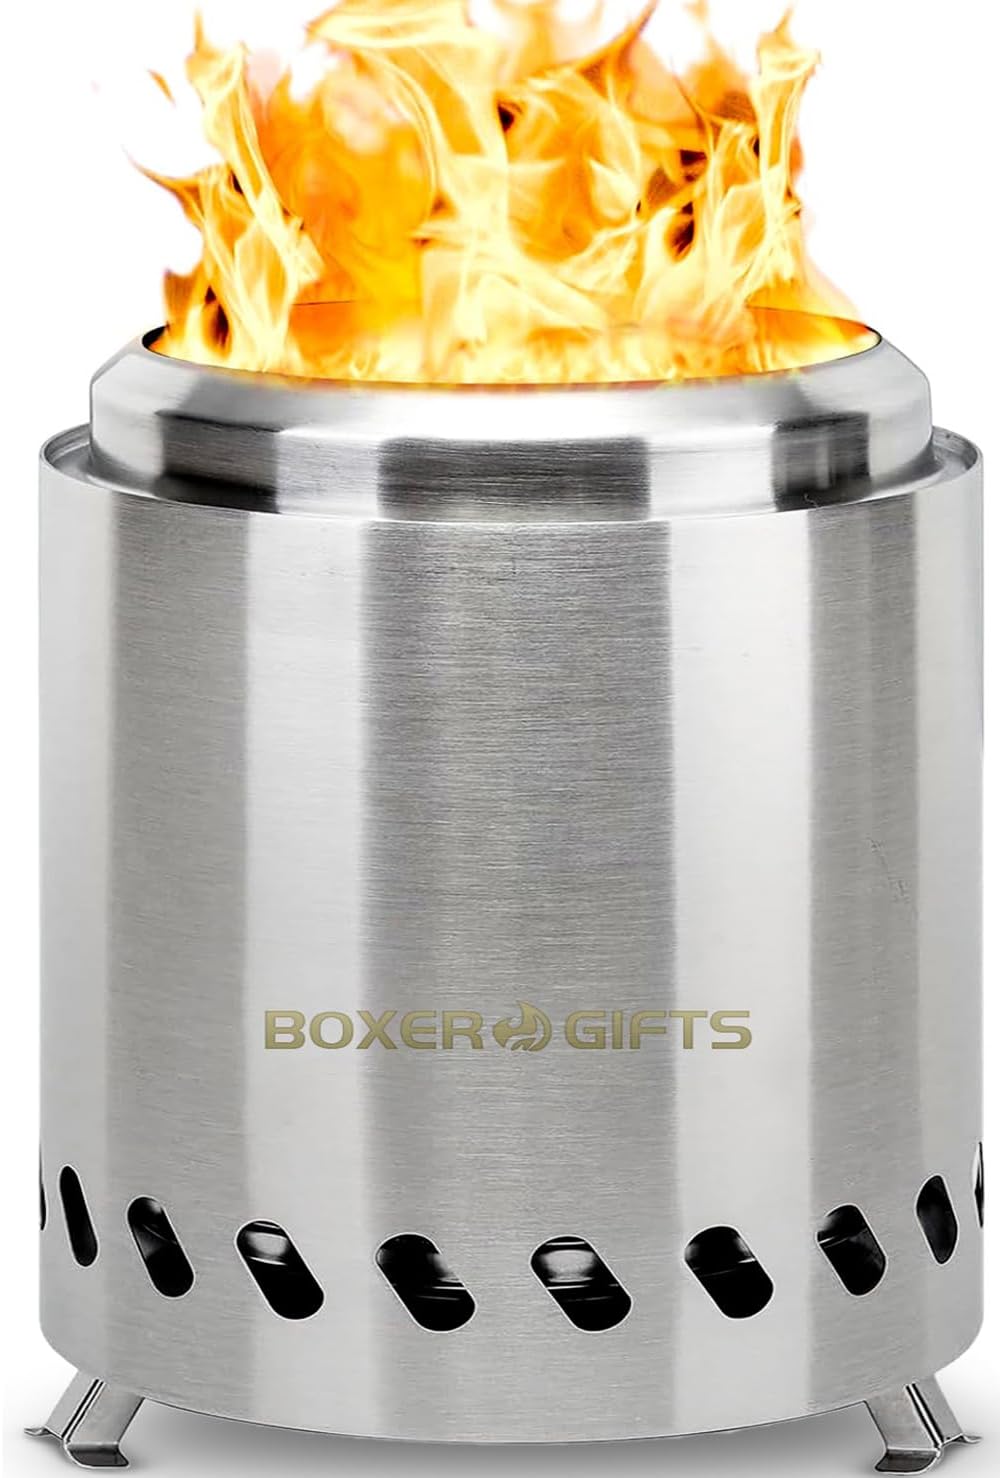 Portable Stainless Steel Fire Pit Review